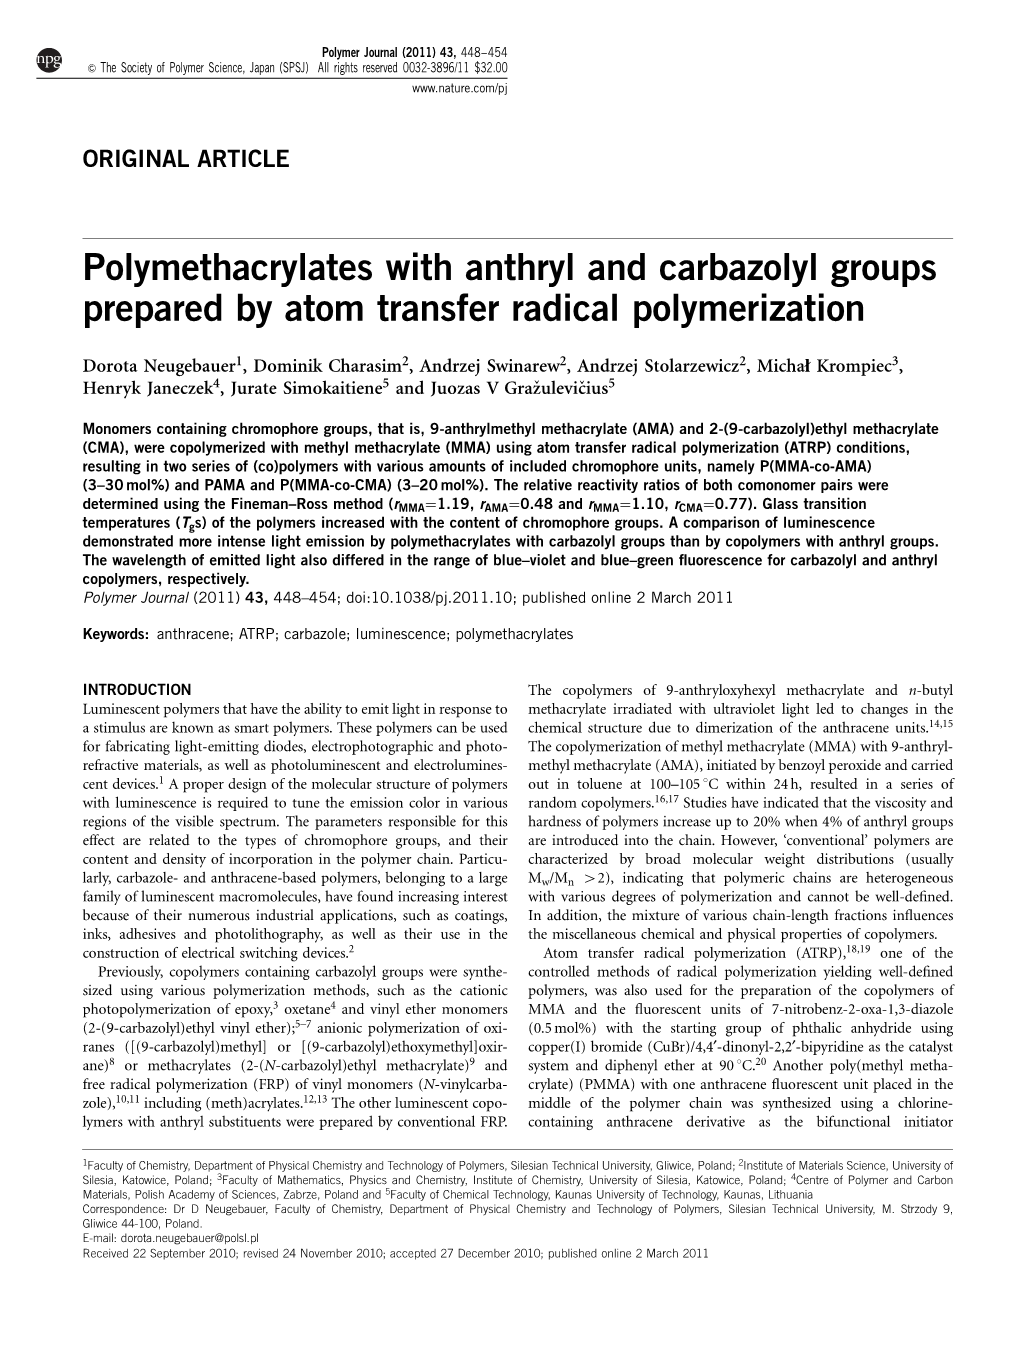 Polymethacrylates with Anthryl and Carbazolyl Groups Prepared by Atom Transfer Radical Polymerization